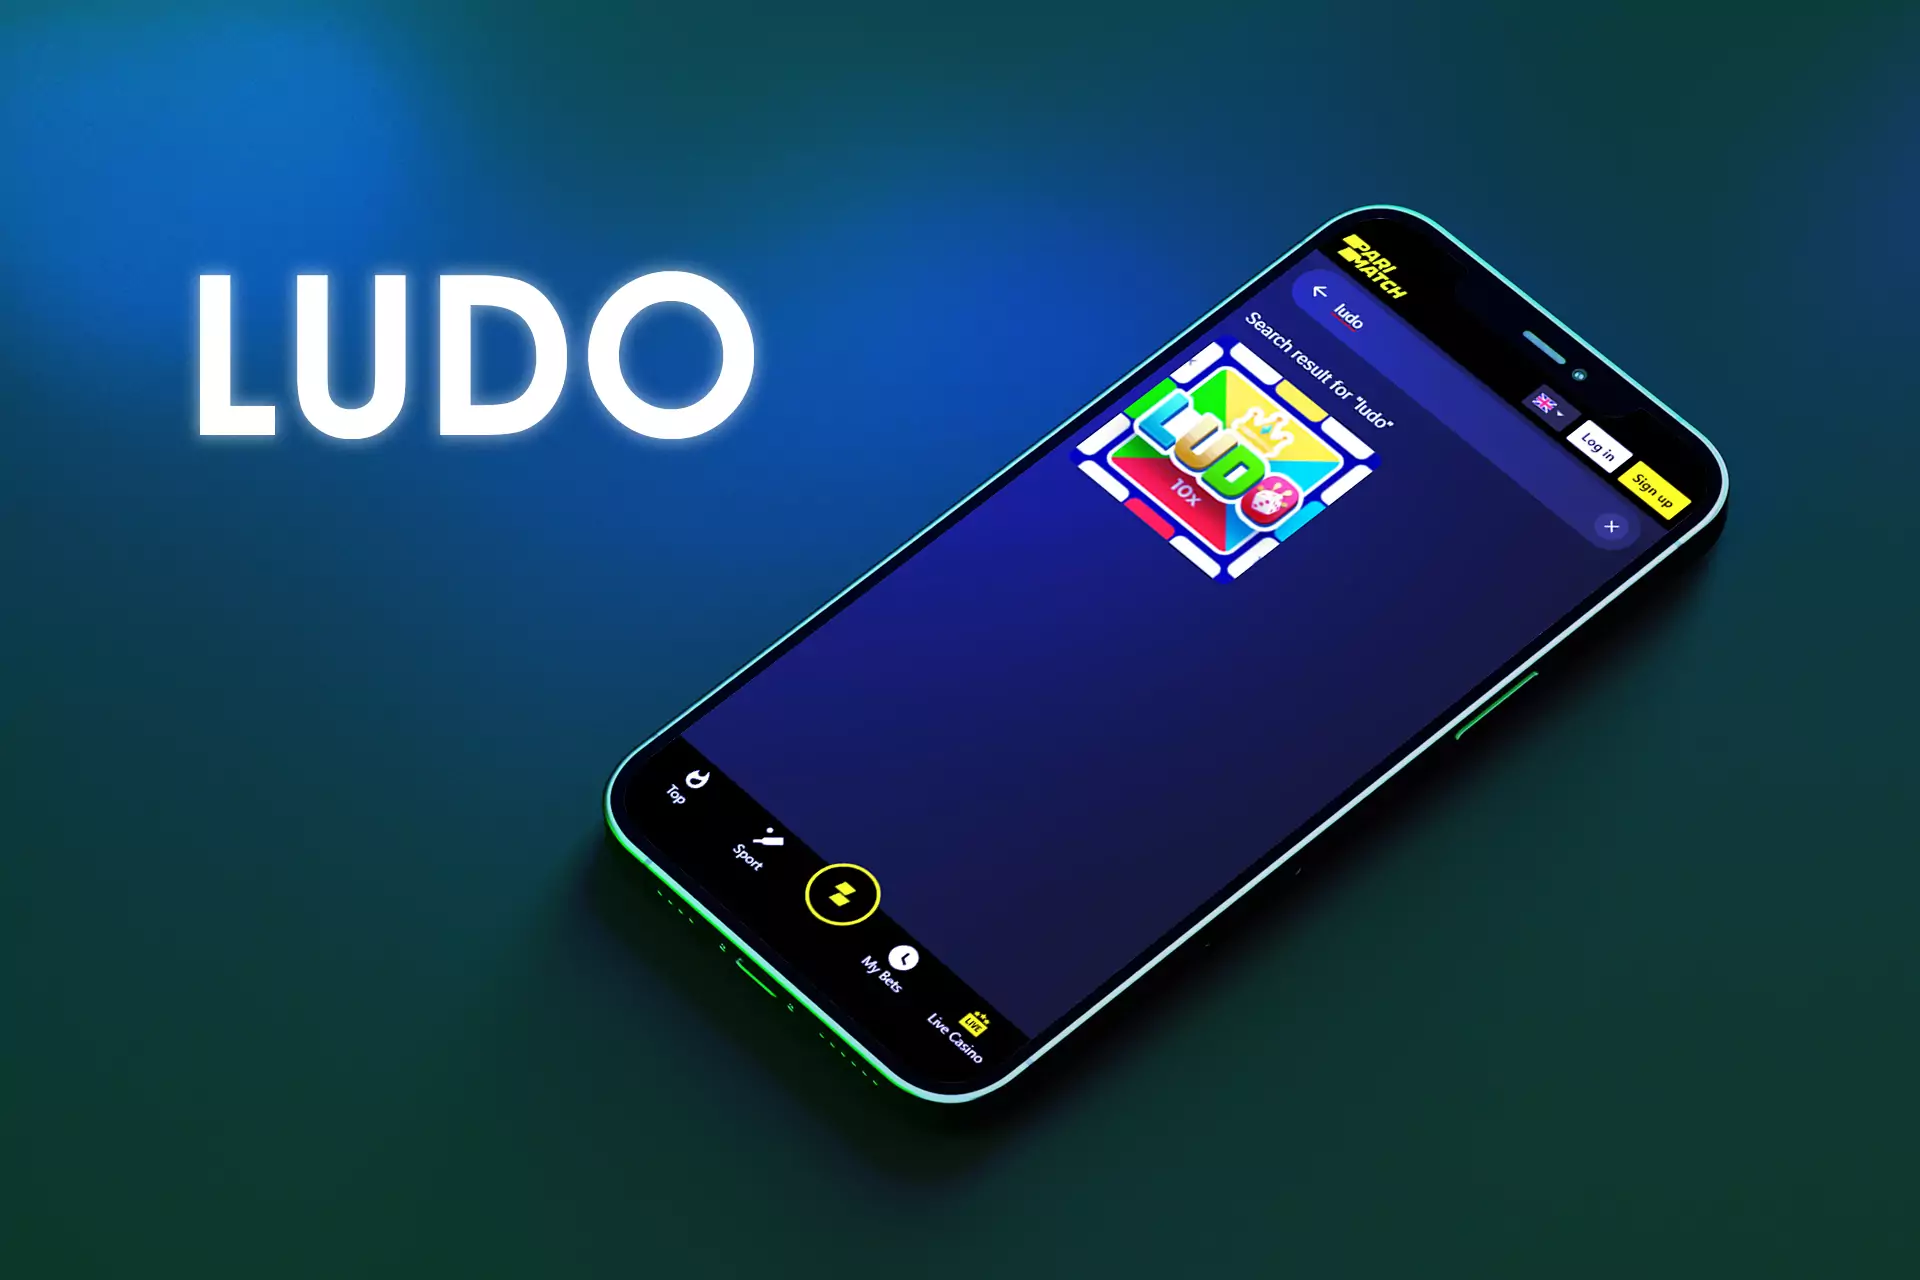 The Parimatch version of Ludo you can find in the section of slots.